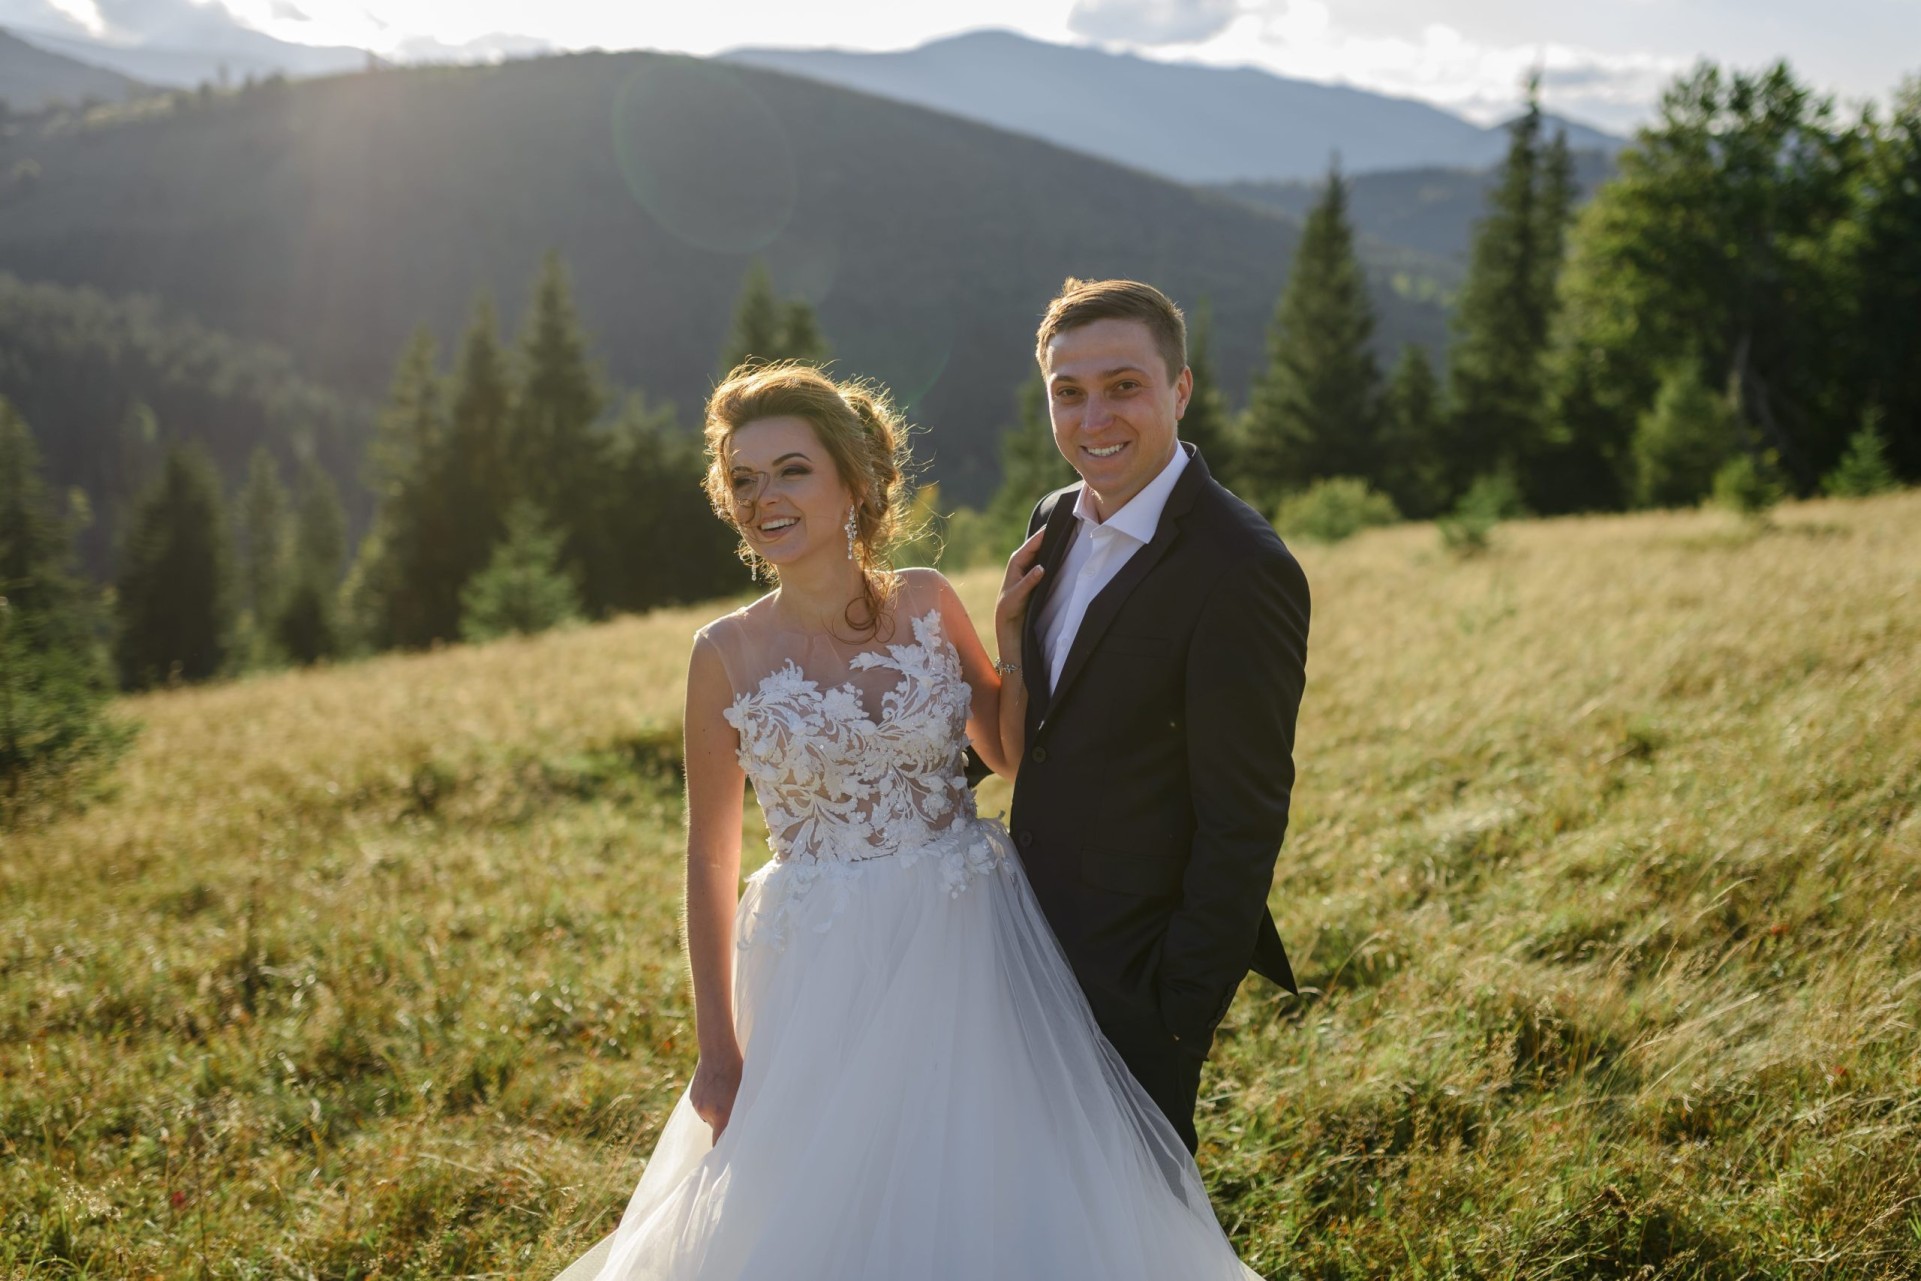 wedding photography in the mountains 2021 09 01 15 26 24 utc min scaled